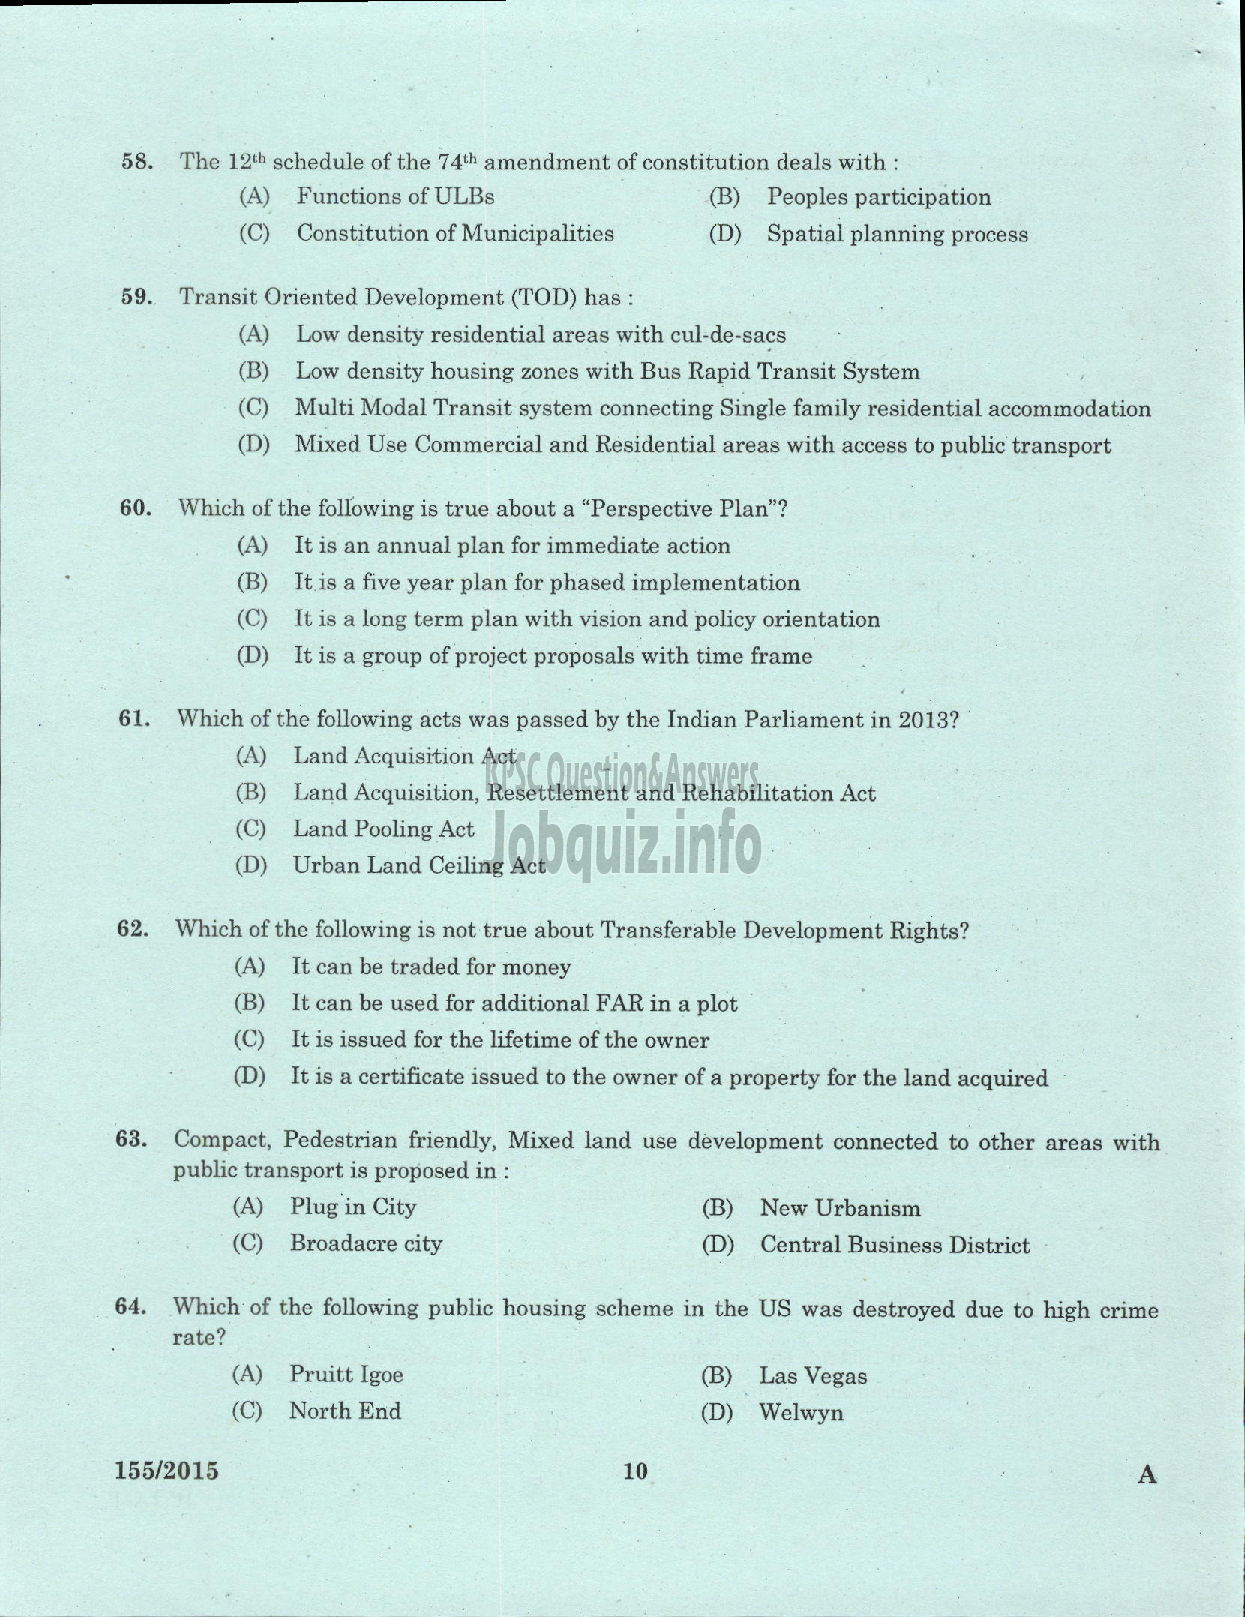 Kerala PSC Question Paper - ASSISTANT TOWN PLANNER TOWN AND COUNTRY PLANNING-8